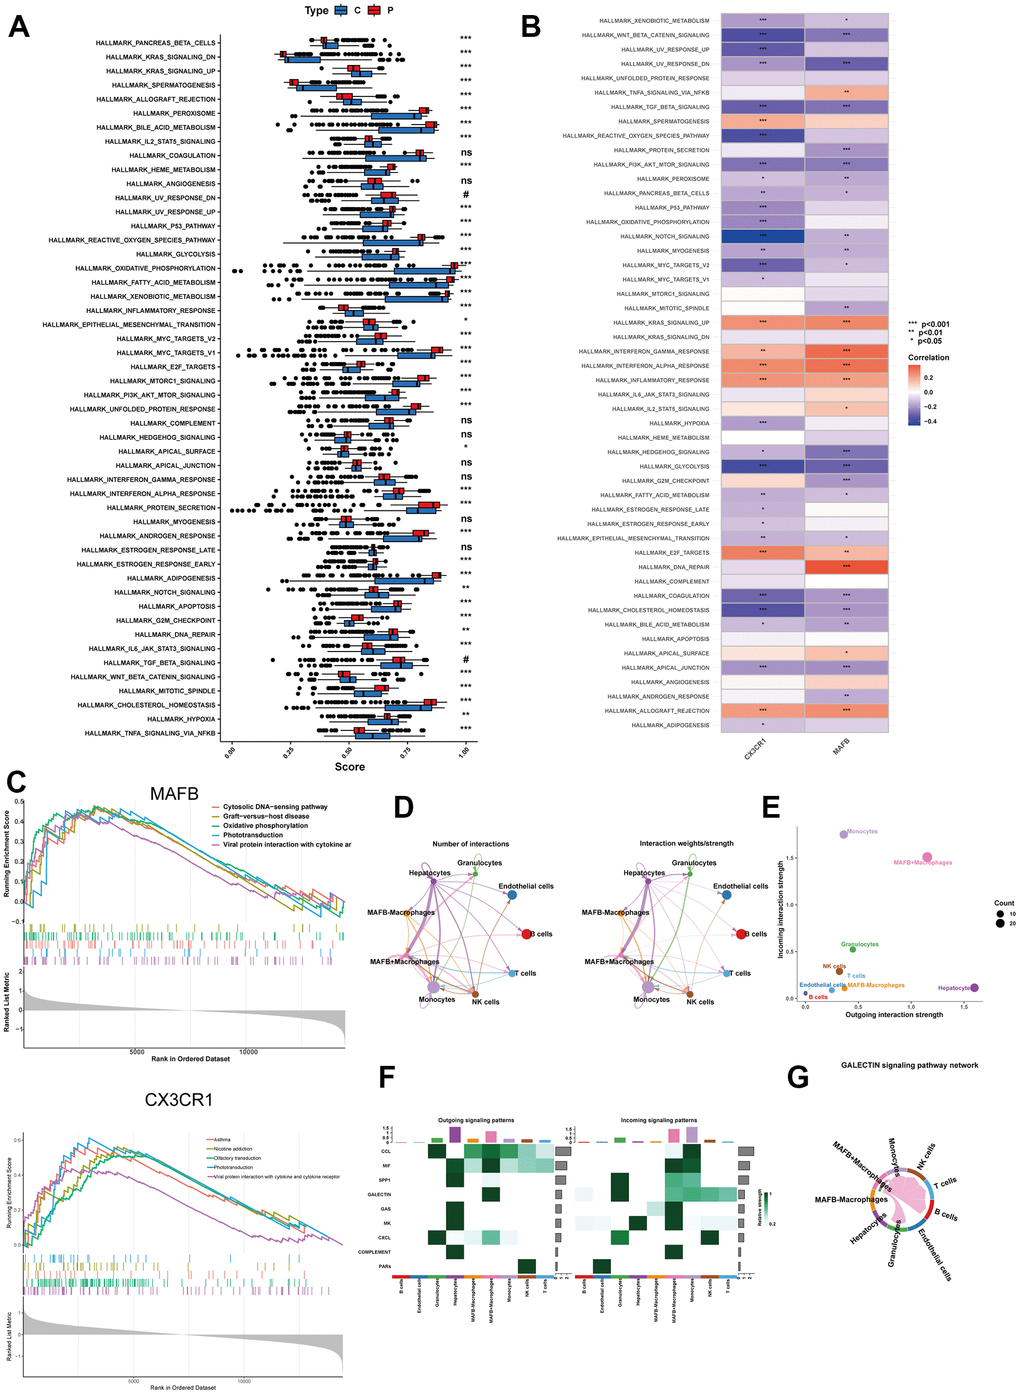 Enrichment analyses by ssGSEA and single-gene GSEA. (A) The specific distribution of 50 hallmark gene sets in the NAFLD group and control group samples. (B) The correlation analysis of 50 hallmark gene sets and 2 top feature genes. (C) Gene sets enrichment analysis (GSEA) identifies top five signaling pathways that are significantly enriched in the high expression of MAFB or CX3CR1. (D) Circle plot showing the communication strength between interacting cells. (E) Scatter plot indicating the incoming and outgoing interaction strength of the cells. (F) The dot plot showing the comparison of outgoing and incoming signaling patterns. (G) The cell communication between MAFB+ macrophages and other cells in the GALECTIN signaling pathway. *P 